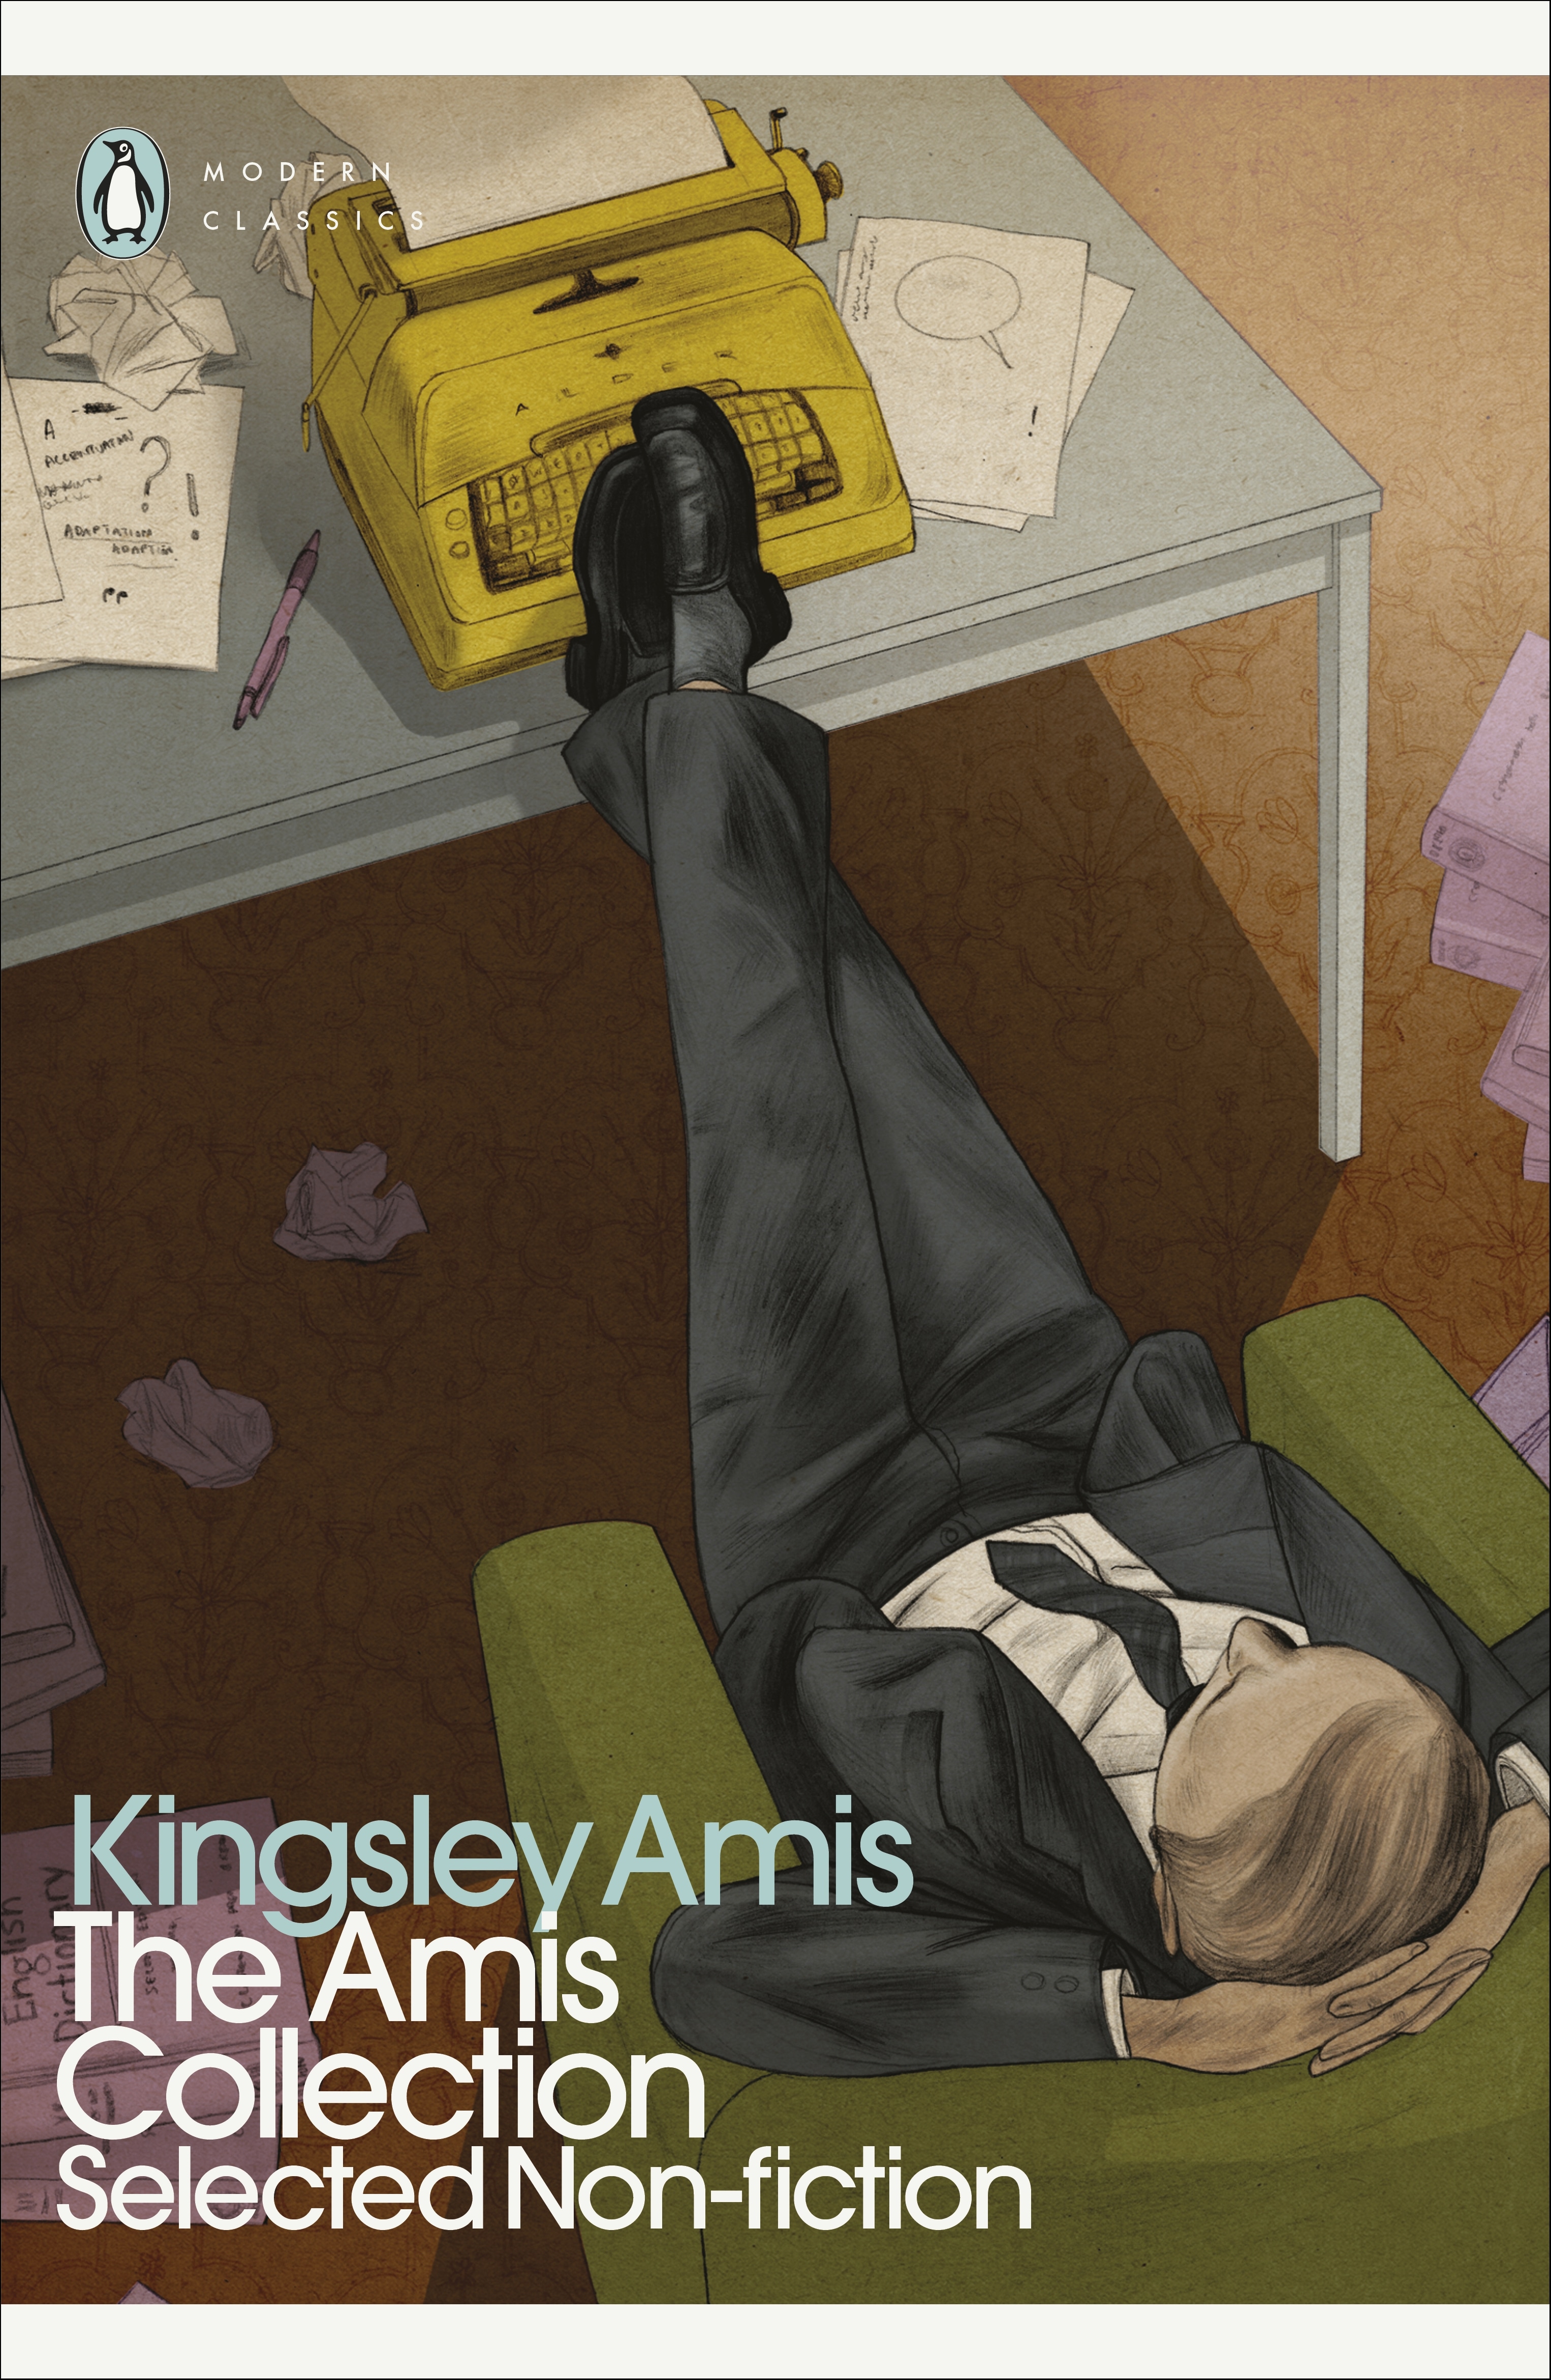 Book “The Amis Collection” by Kingsley Amis — April 7, 2022